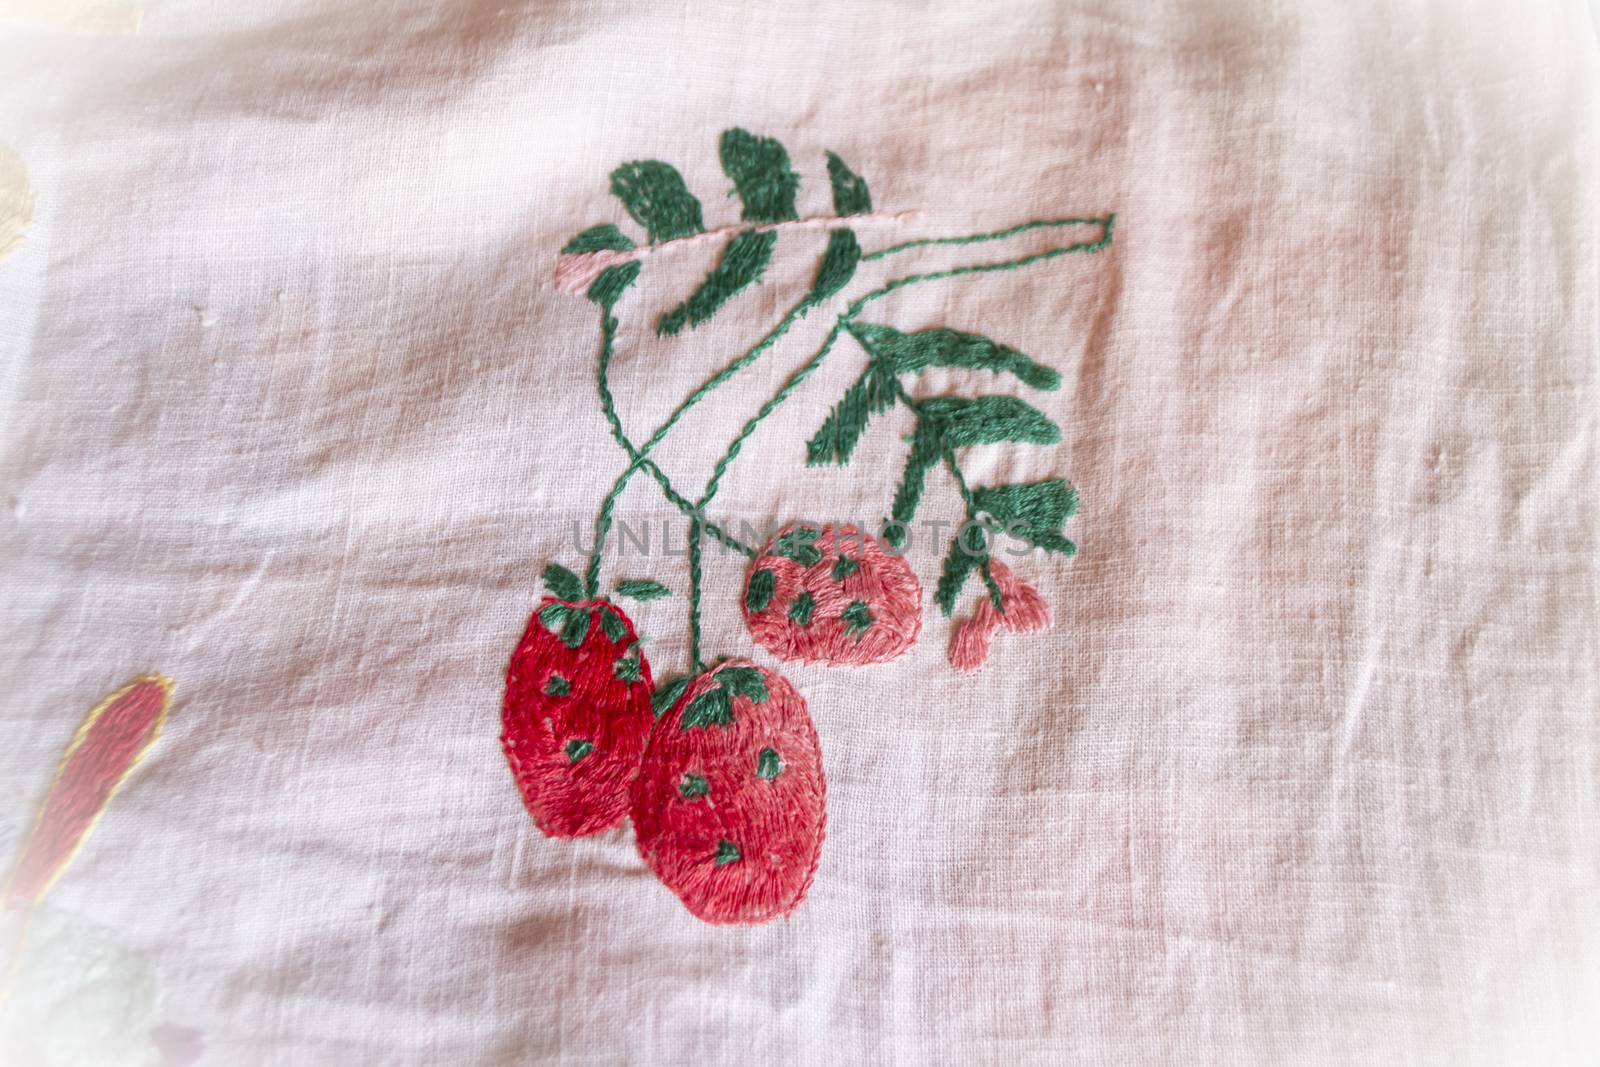 hand made embroidered smooth berry decoration on white fabric , vintage folk embroidery in Belarus, second half of 19 century